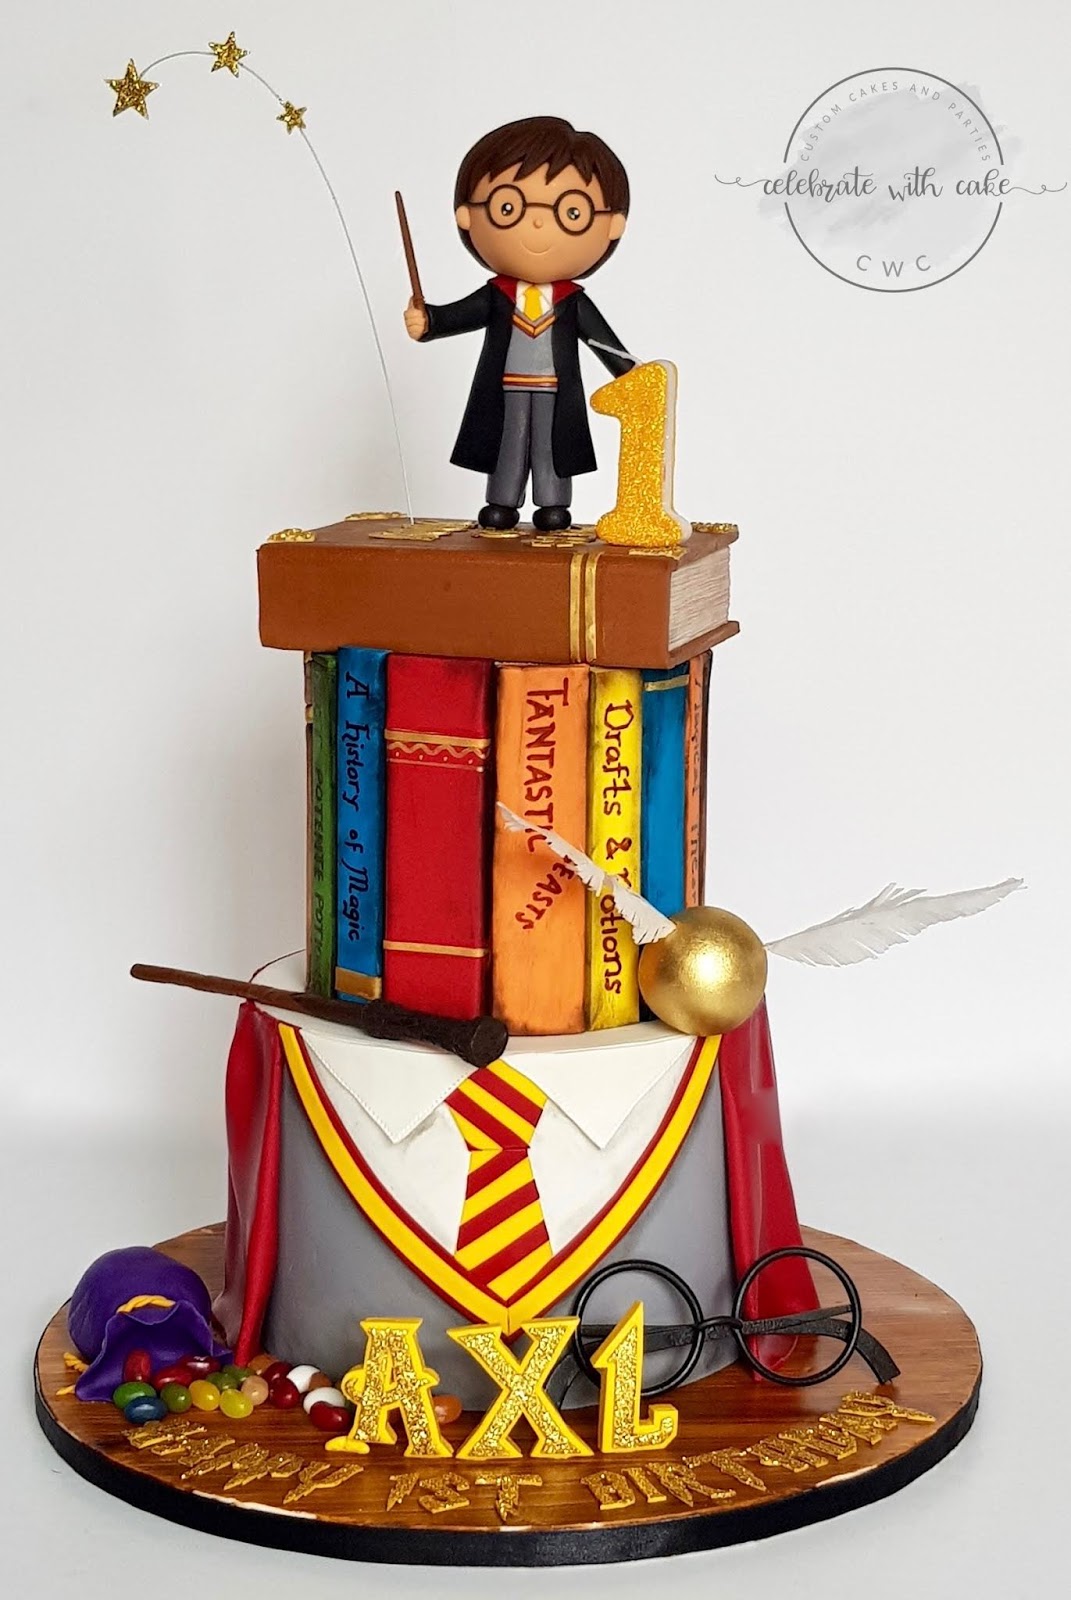 Celebrate with Cake!: Cute Harry Potter Two tiers 1st Birthday Cake